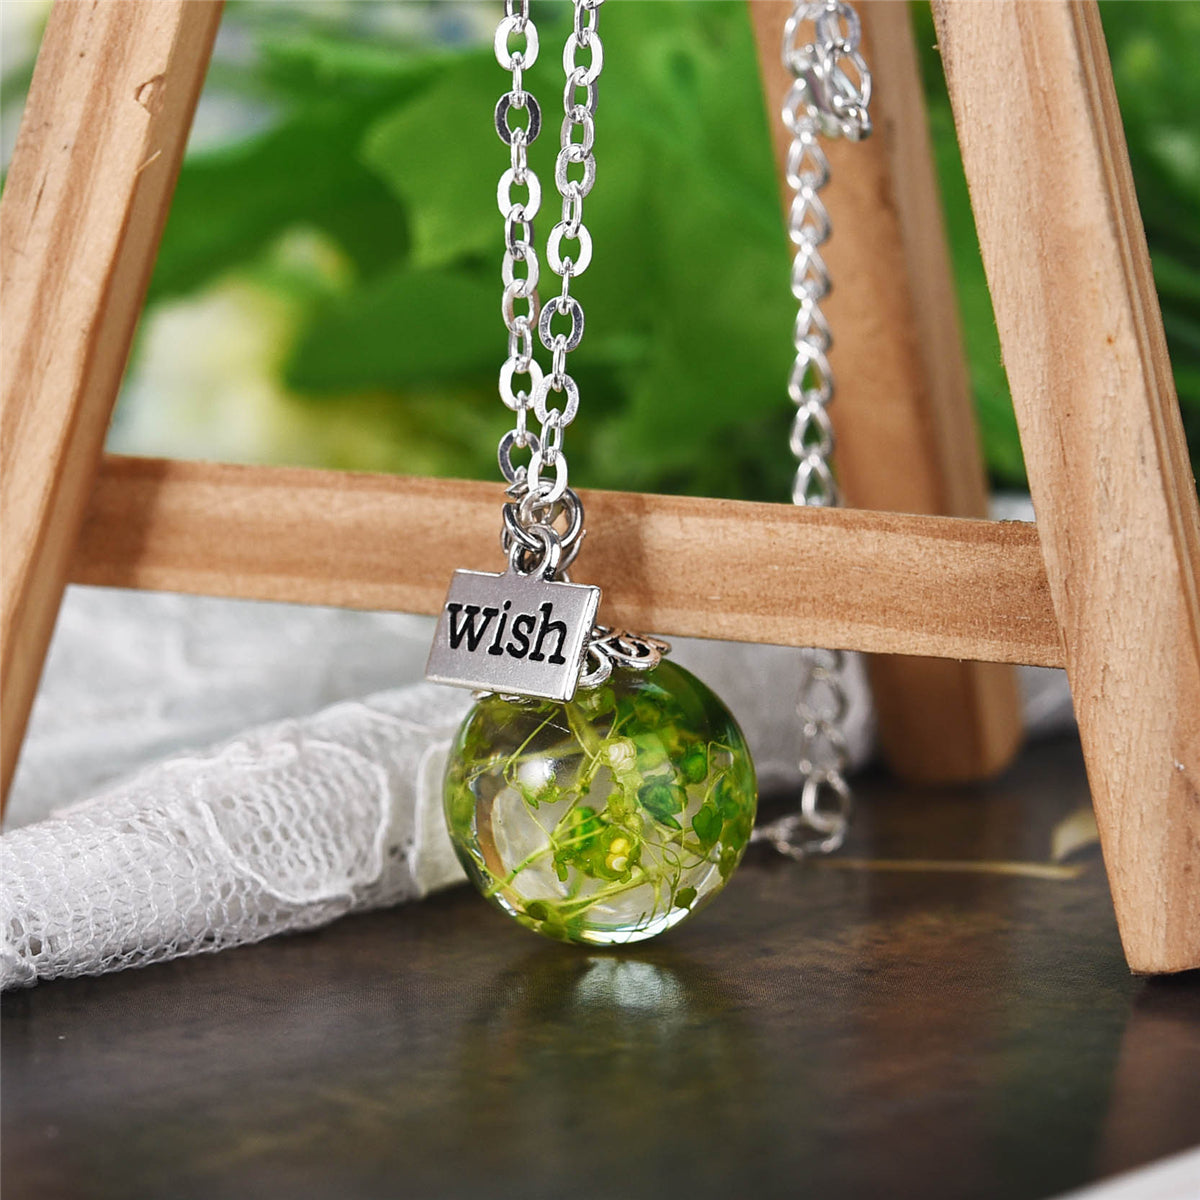 Green Gypsophila & Silver-Plated 'Wish' Pendant Necklace